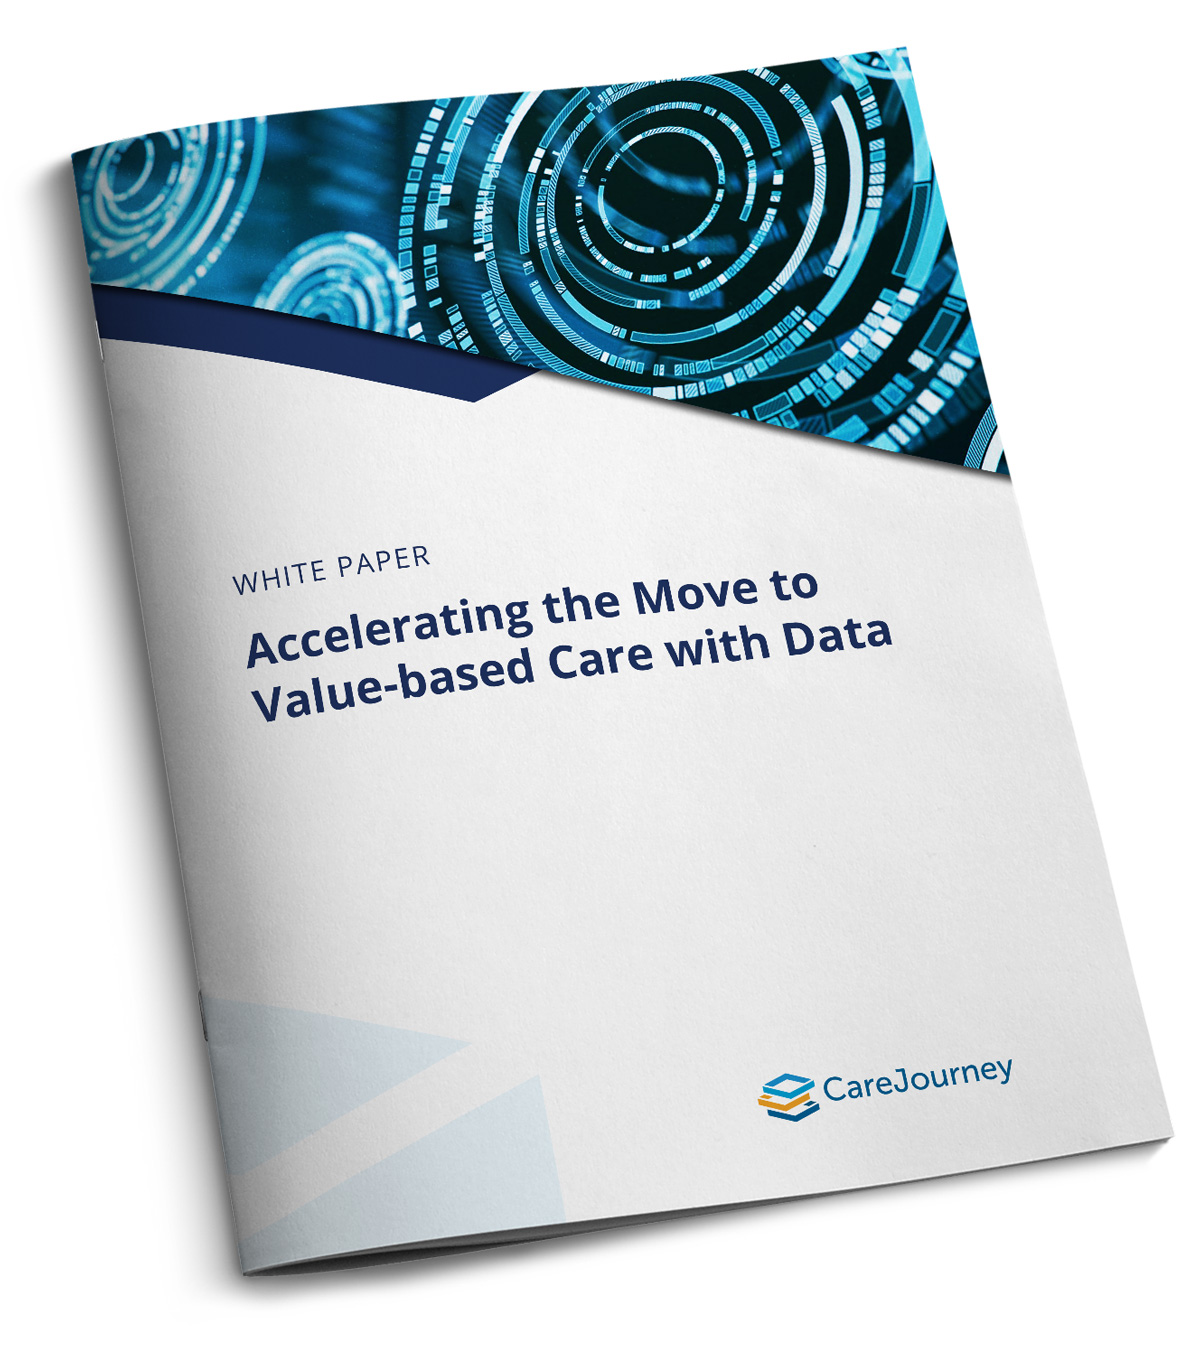 CareJourney Whitepaper: Accelerating the Move to Value-based Care with Data